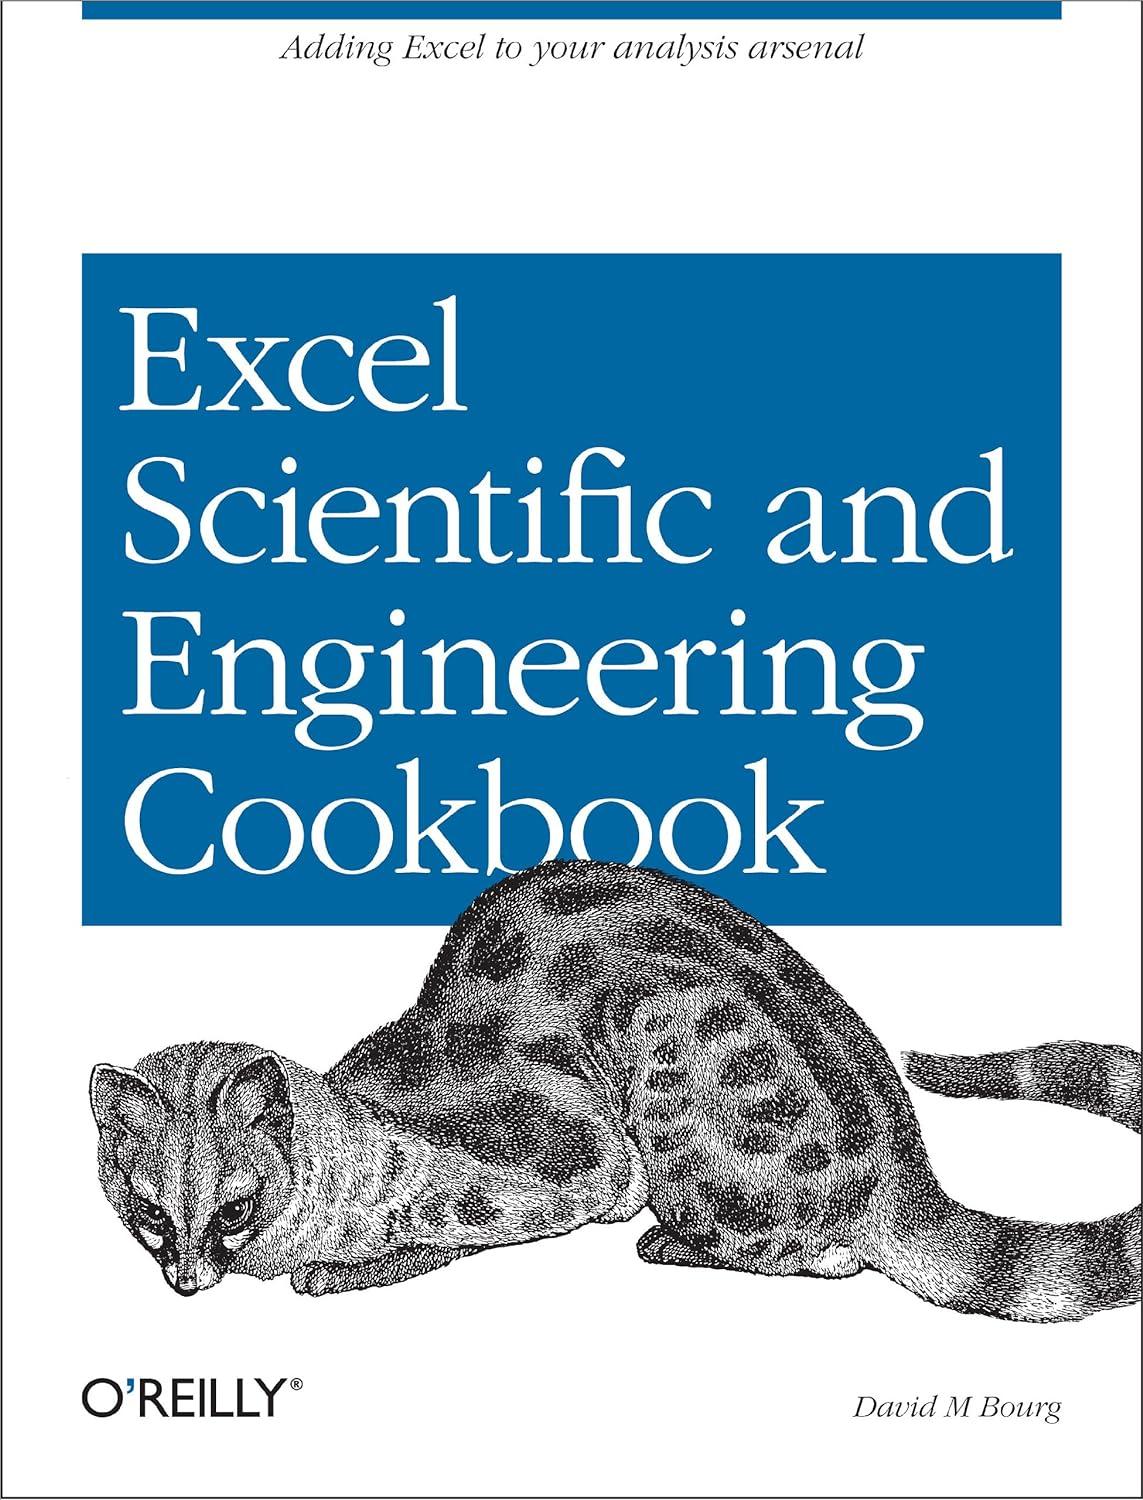 excel scientific and engineering cookbook adding excel to your analysis arsenal 1st edition david bourg